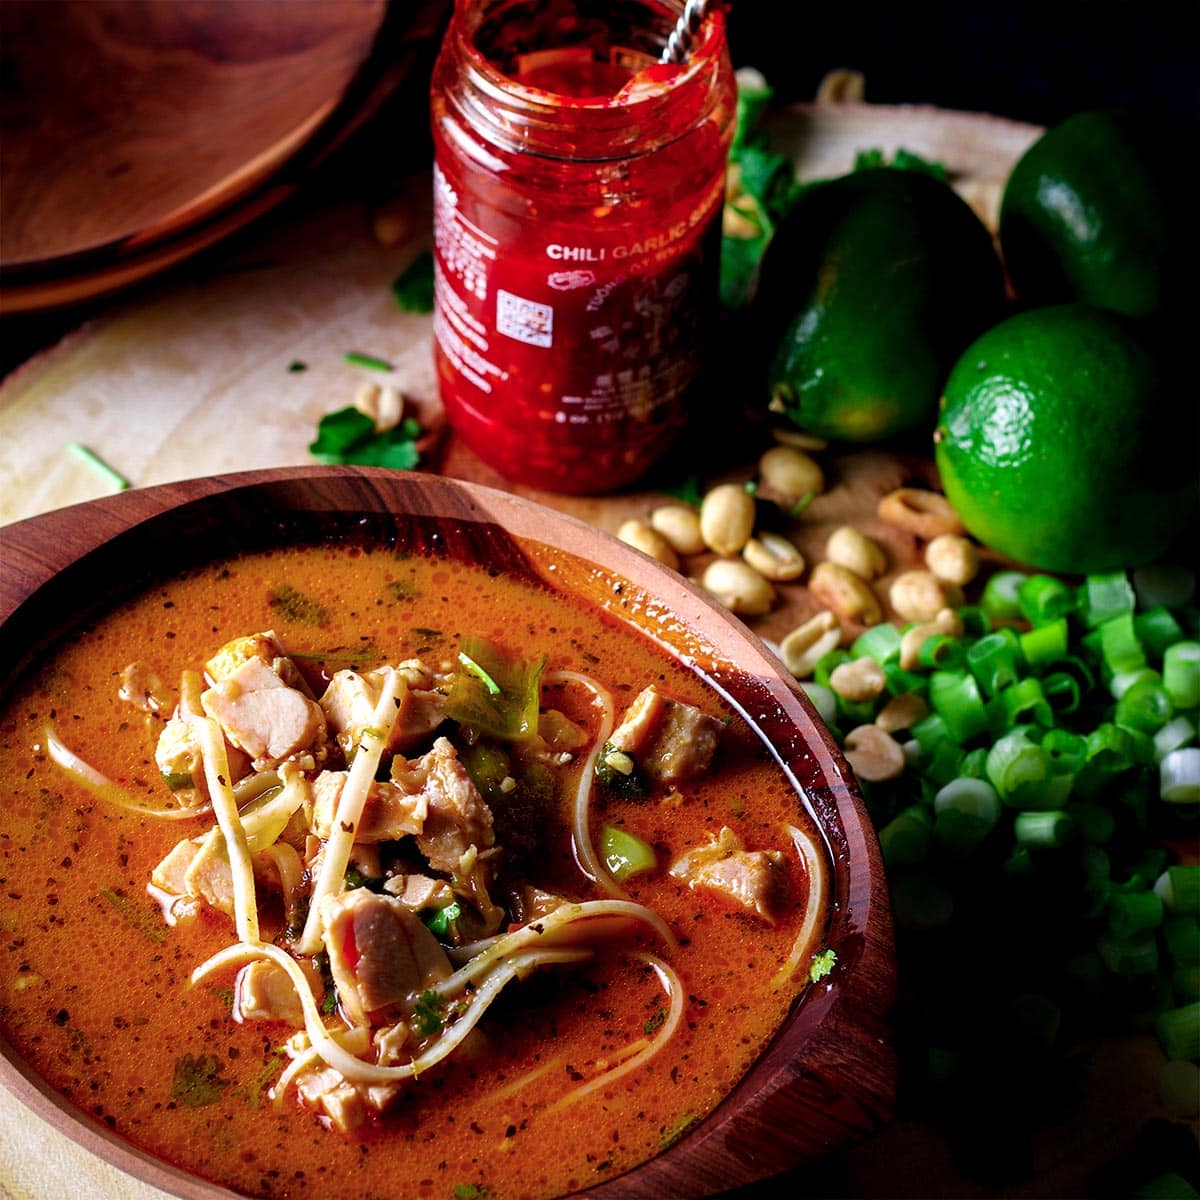 A bowl of Thai chicken noodle soup on a table piled with chili garlic sauce, roasted peanuts, fresh limes, and cilantro.